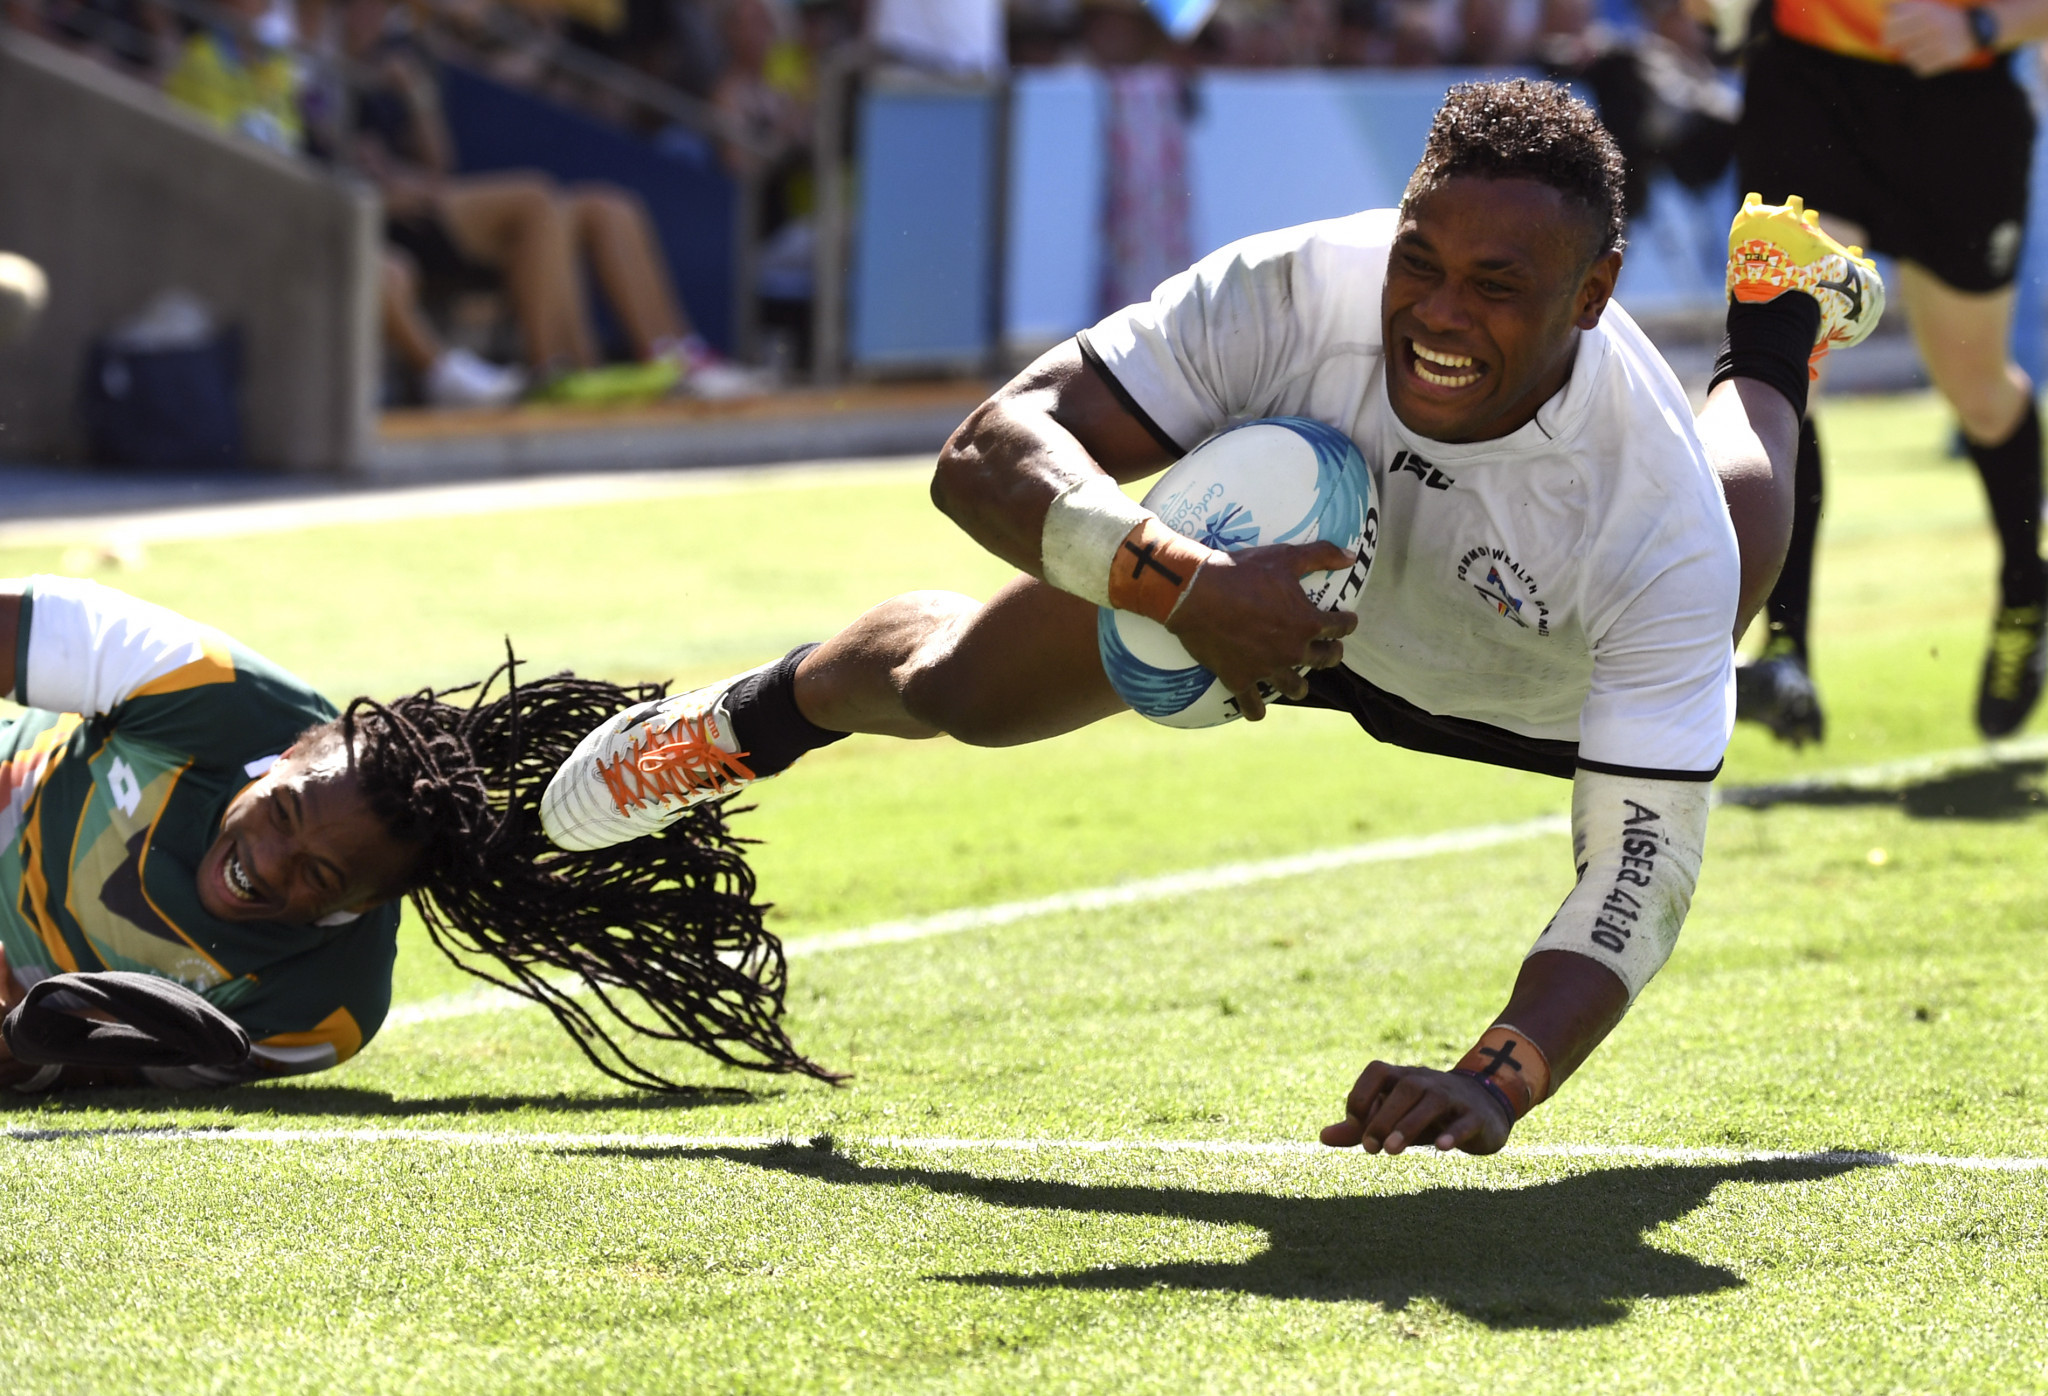 Fiji won four medals at Gold Coast 2018, including men's rugby sevens silver  ©Getty Images